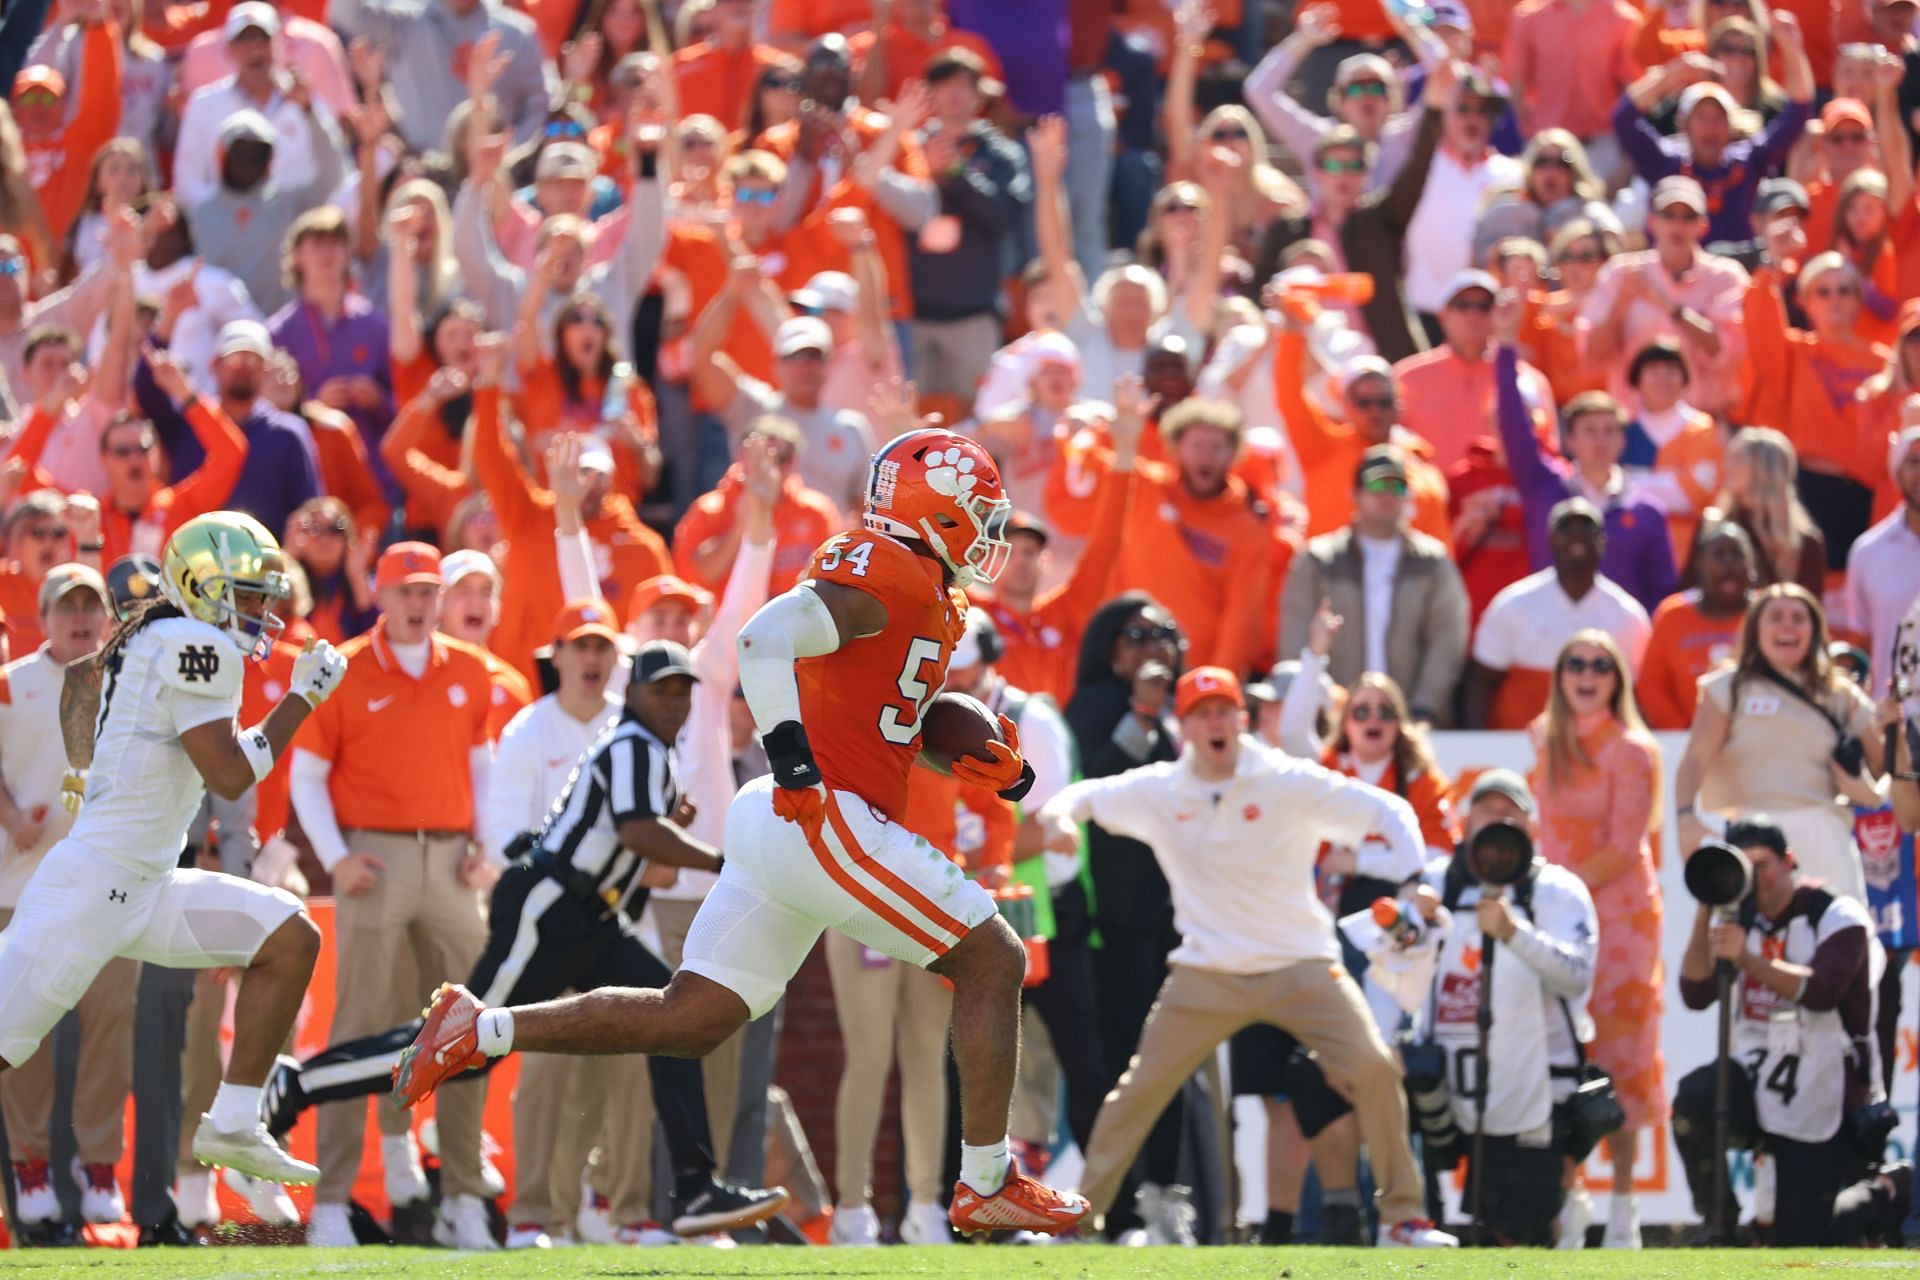 Jeremiah Trotter Jr. #54 of the Clemson Tigers intercepts the ball against the Notre Dame Fighting Irish